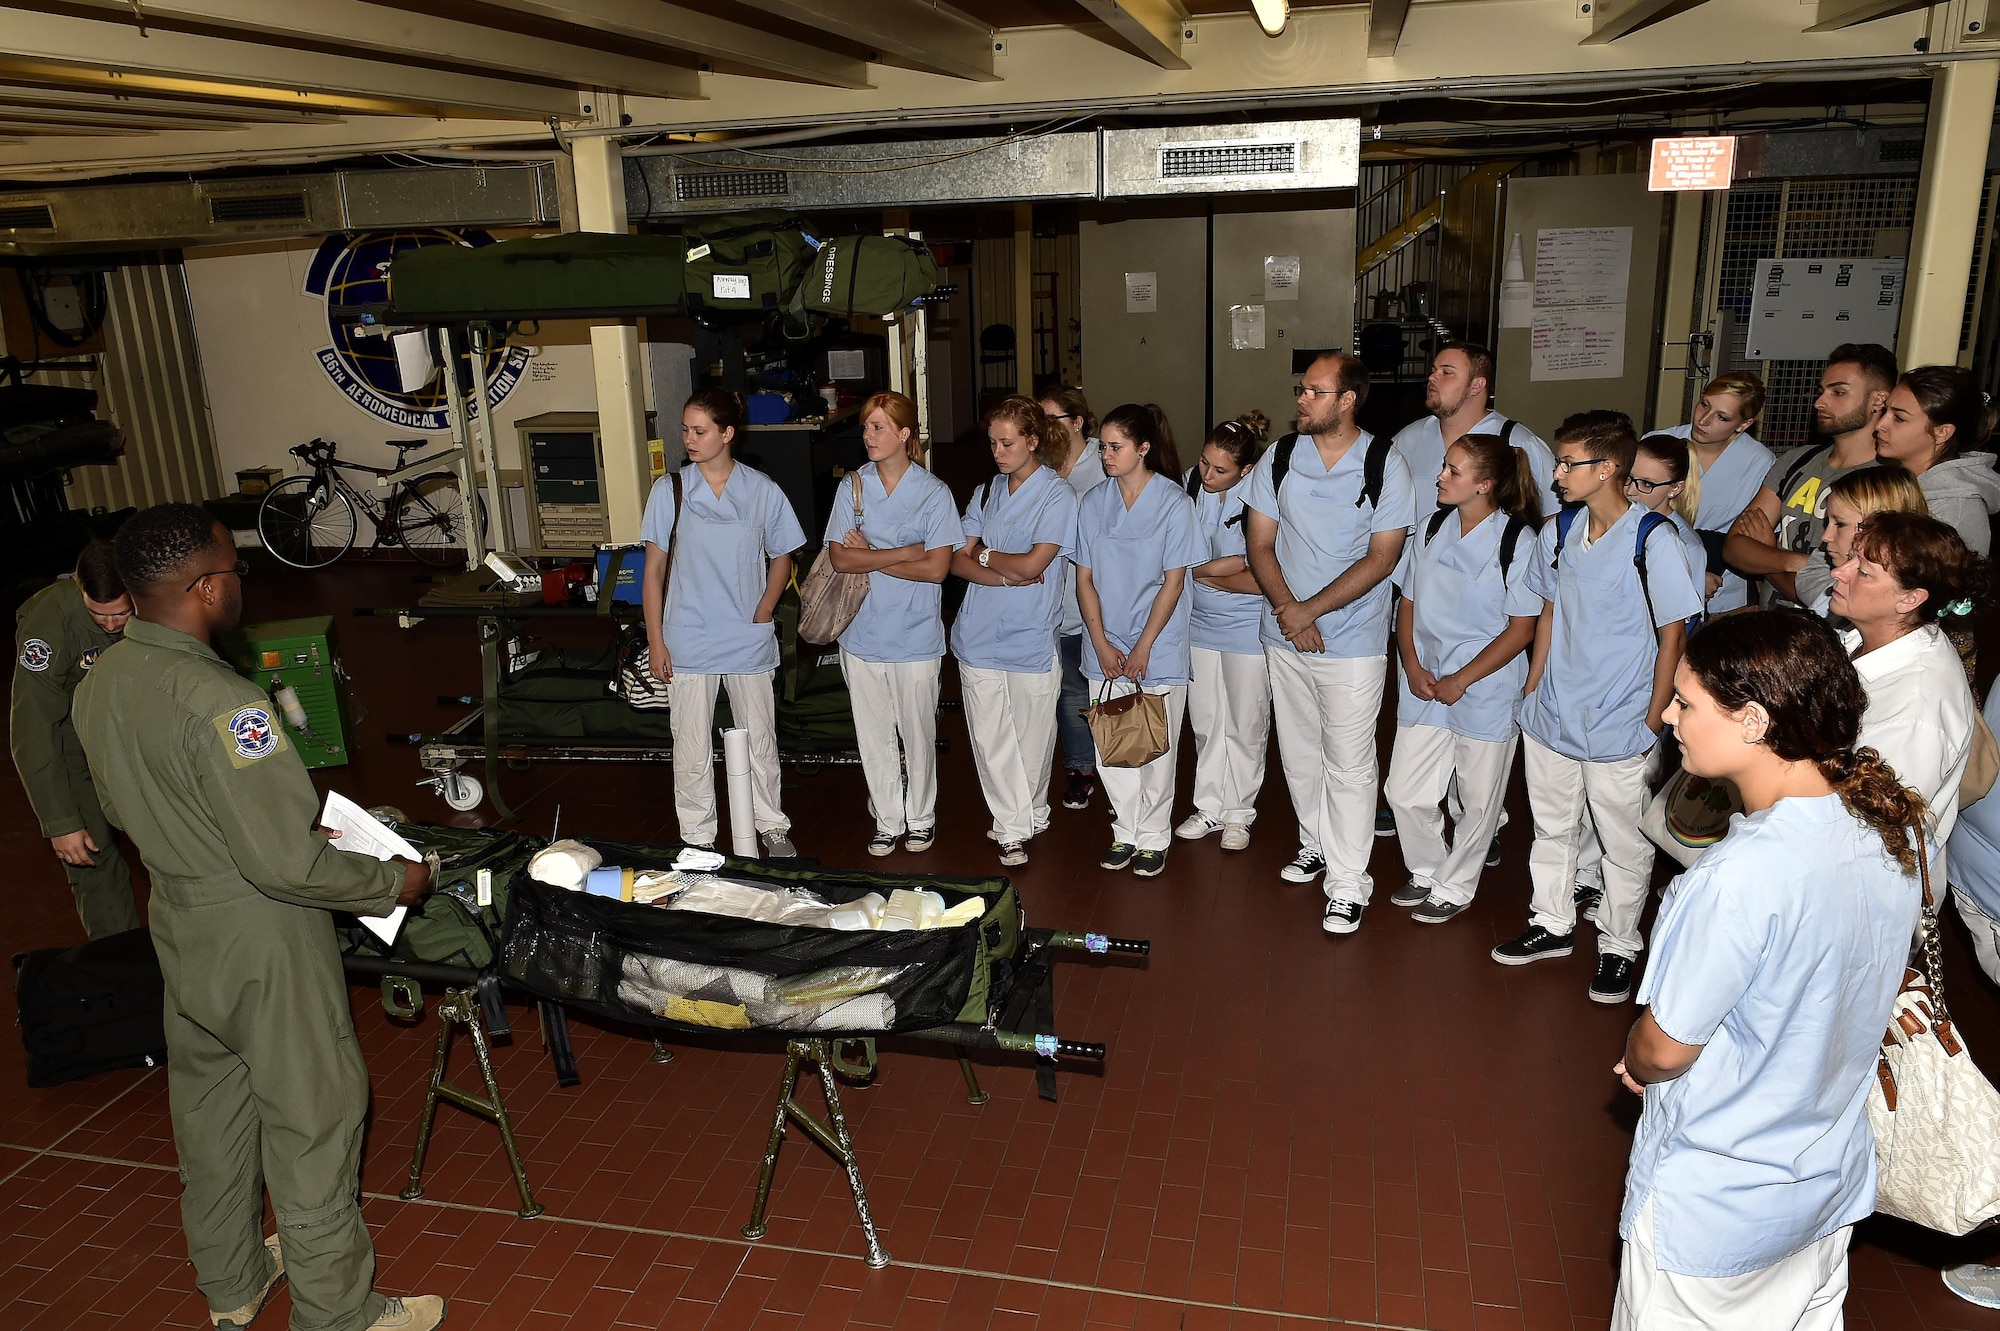 Nursing students from Caritas SchulZentrum St. Hildegard, Saarbrücken, Germany, listen to a flight medic from the 86th Aeromedical Evacuation Squadron during a tour of the 86th AES facilities at Ramstein Air Base, Germany, Sept. 13, 2016. The students received an introduction to the 86th AES mission from Airmen assigned to the squadron. (U.S. Air Force photo by Senior Airman Jonathan Bass)